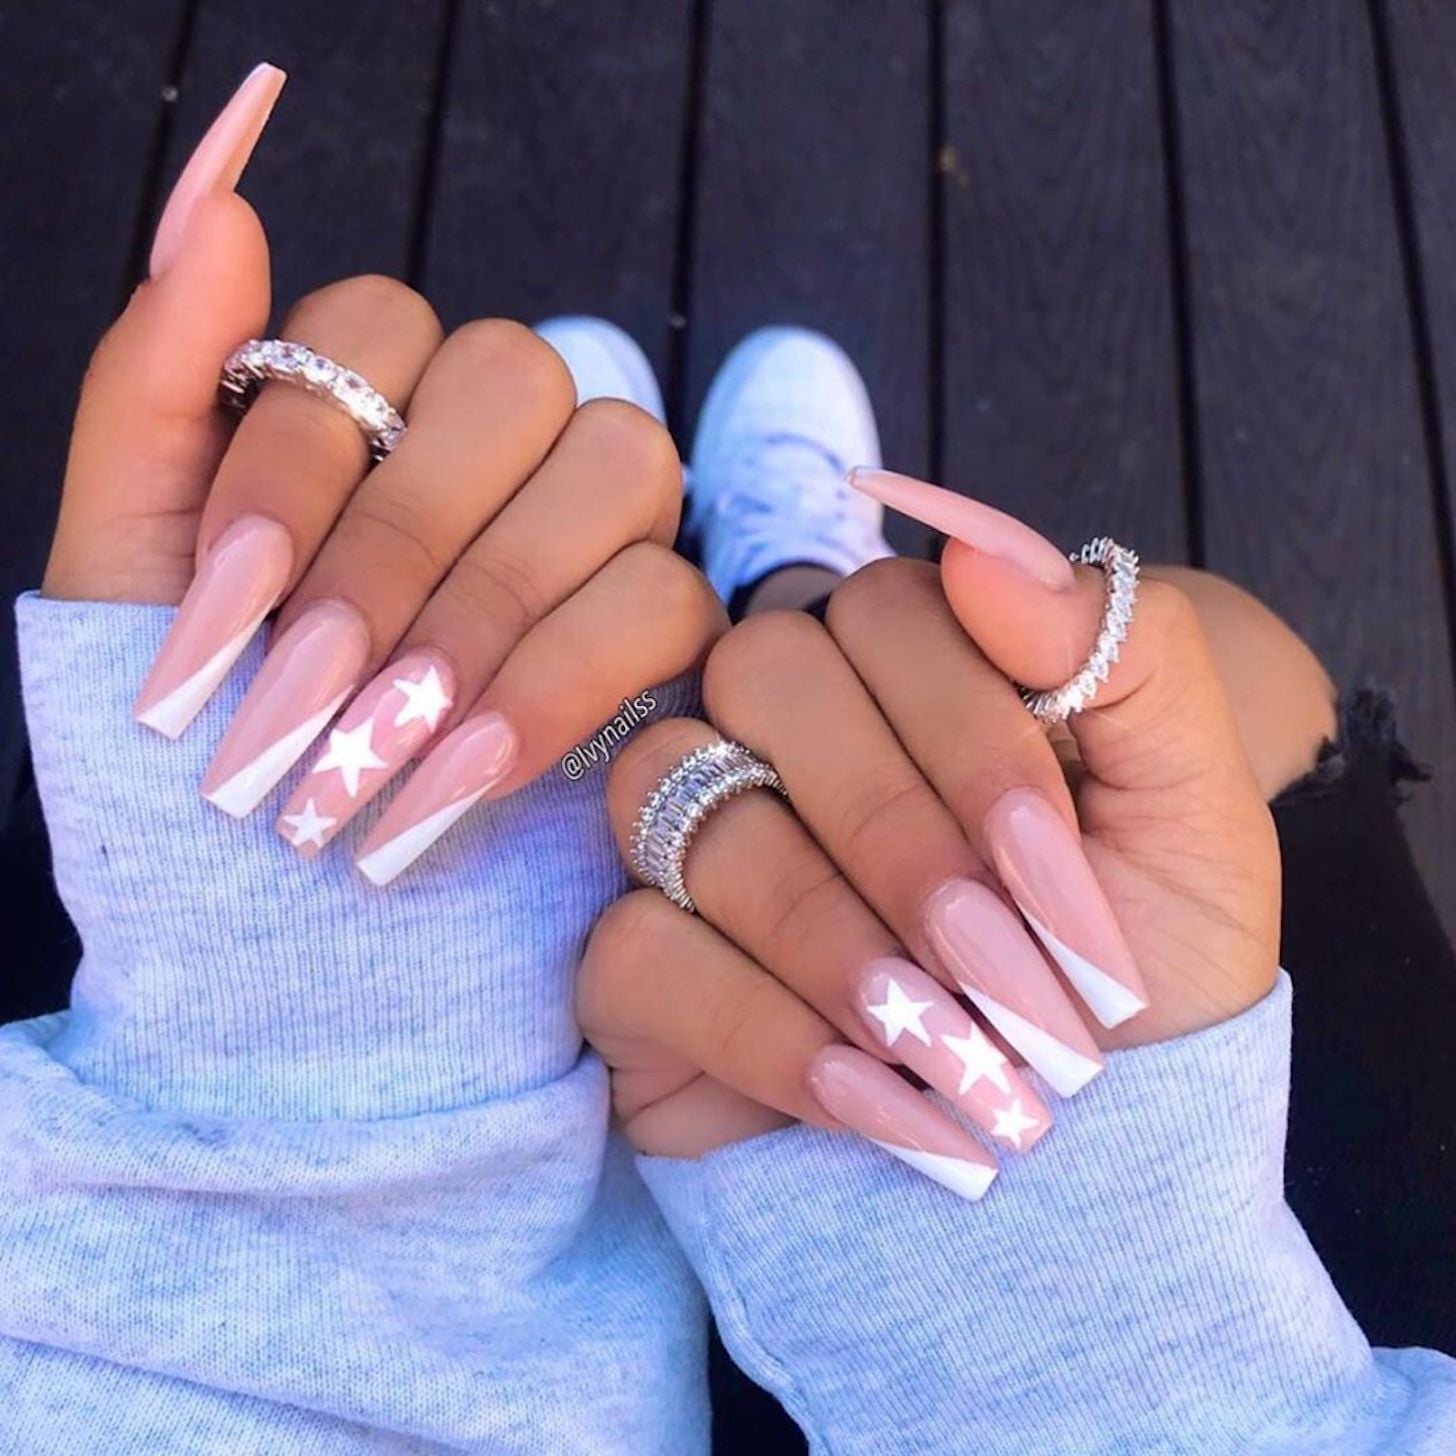 Side-Tip French Manicure is Our Favorite Nail Art Trend